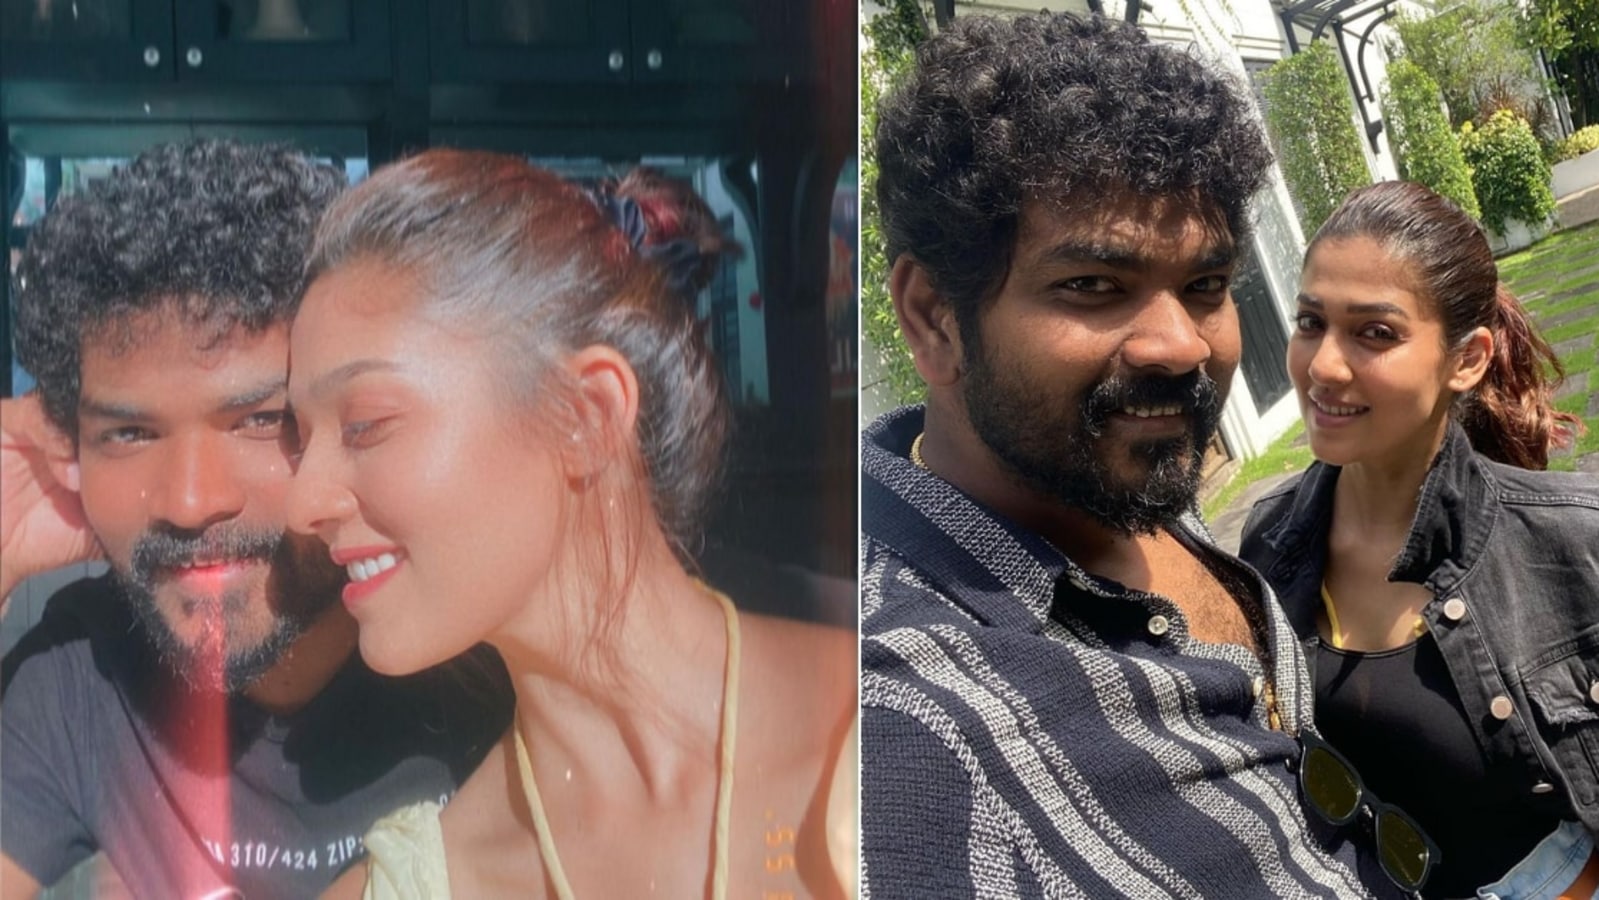 Nayanthara and Vignesh Shivan pose together in loved-up honeymoon pics from Thailand, fans call it ‘pure bliss’